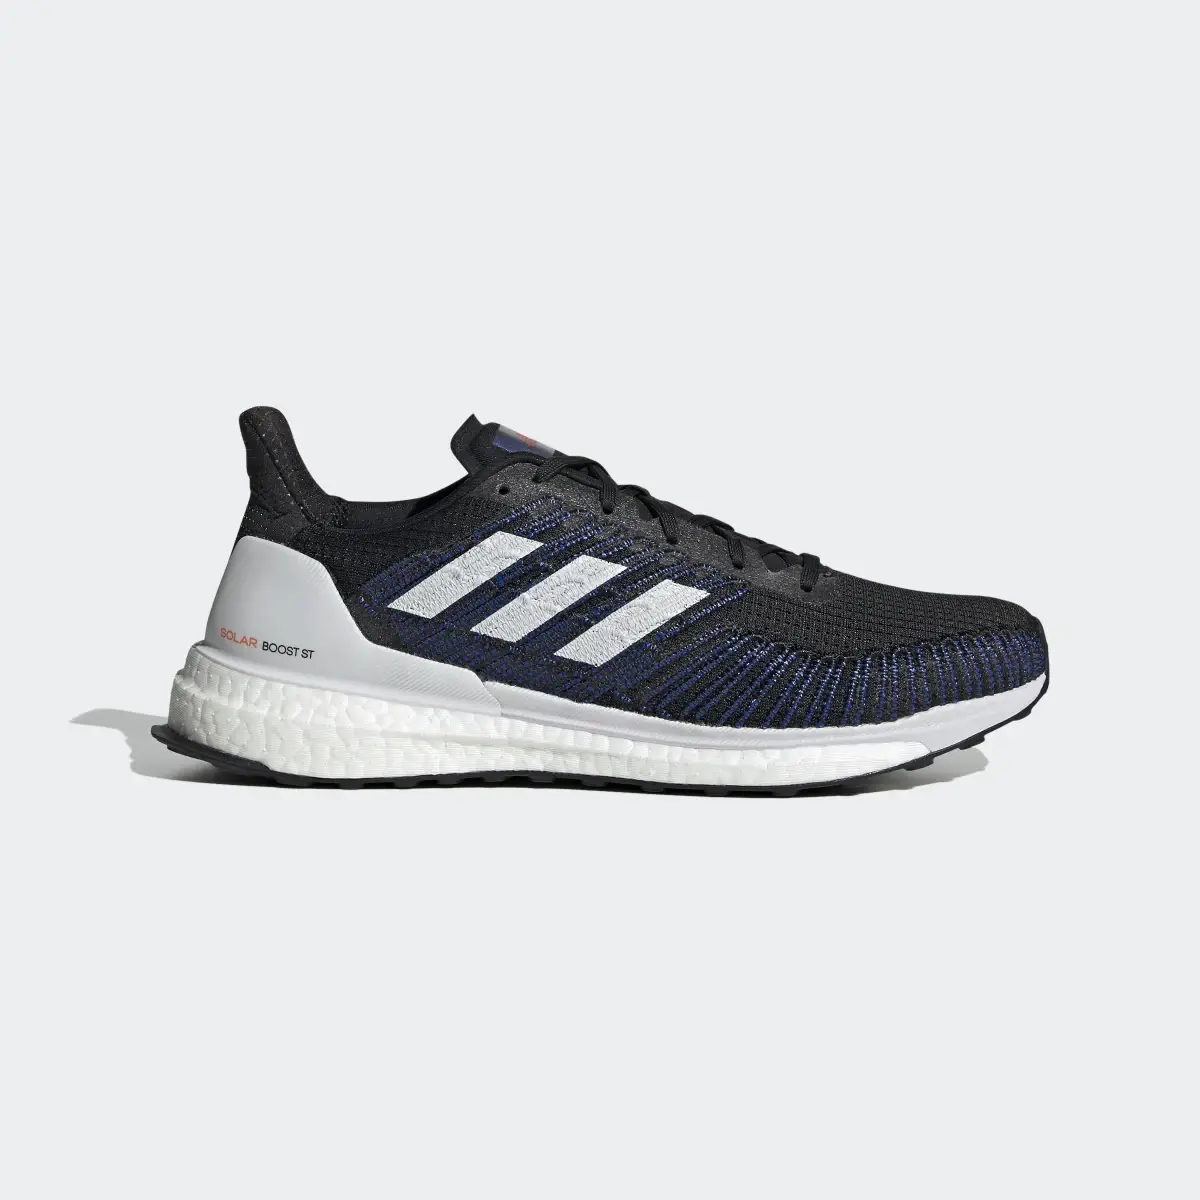 Adidas Solarboost ST 19 Shoes. 2